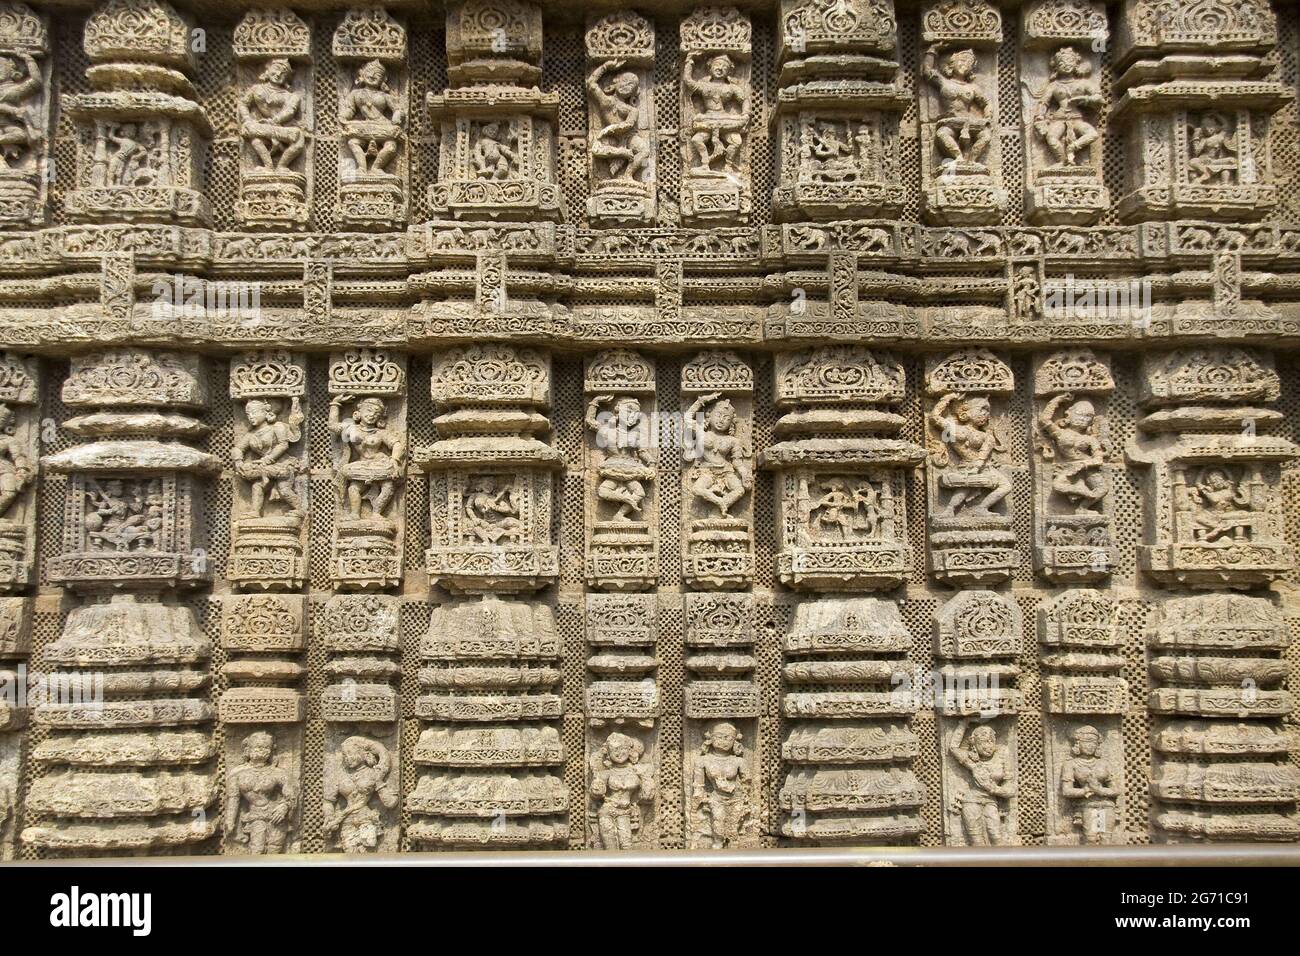 Of various music and dance poses by deft hands on wall of Sun Temple Konark India Asia Stock Photo